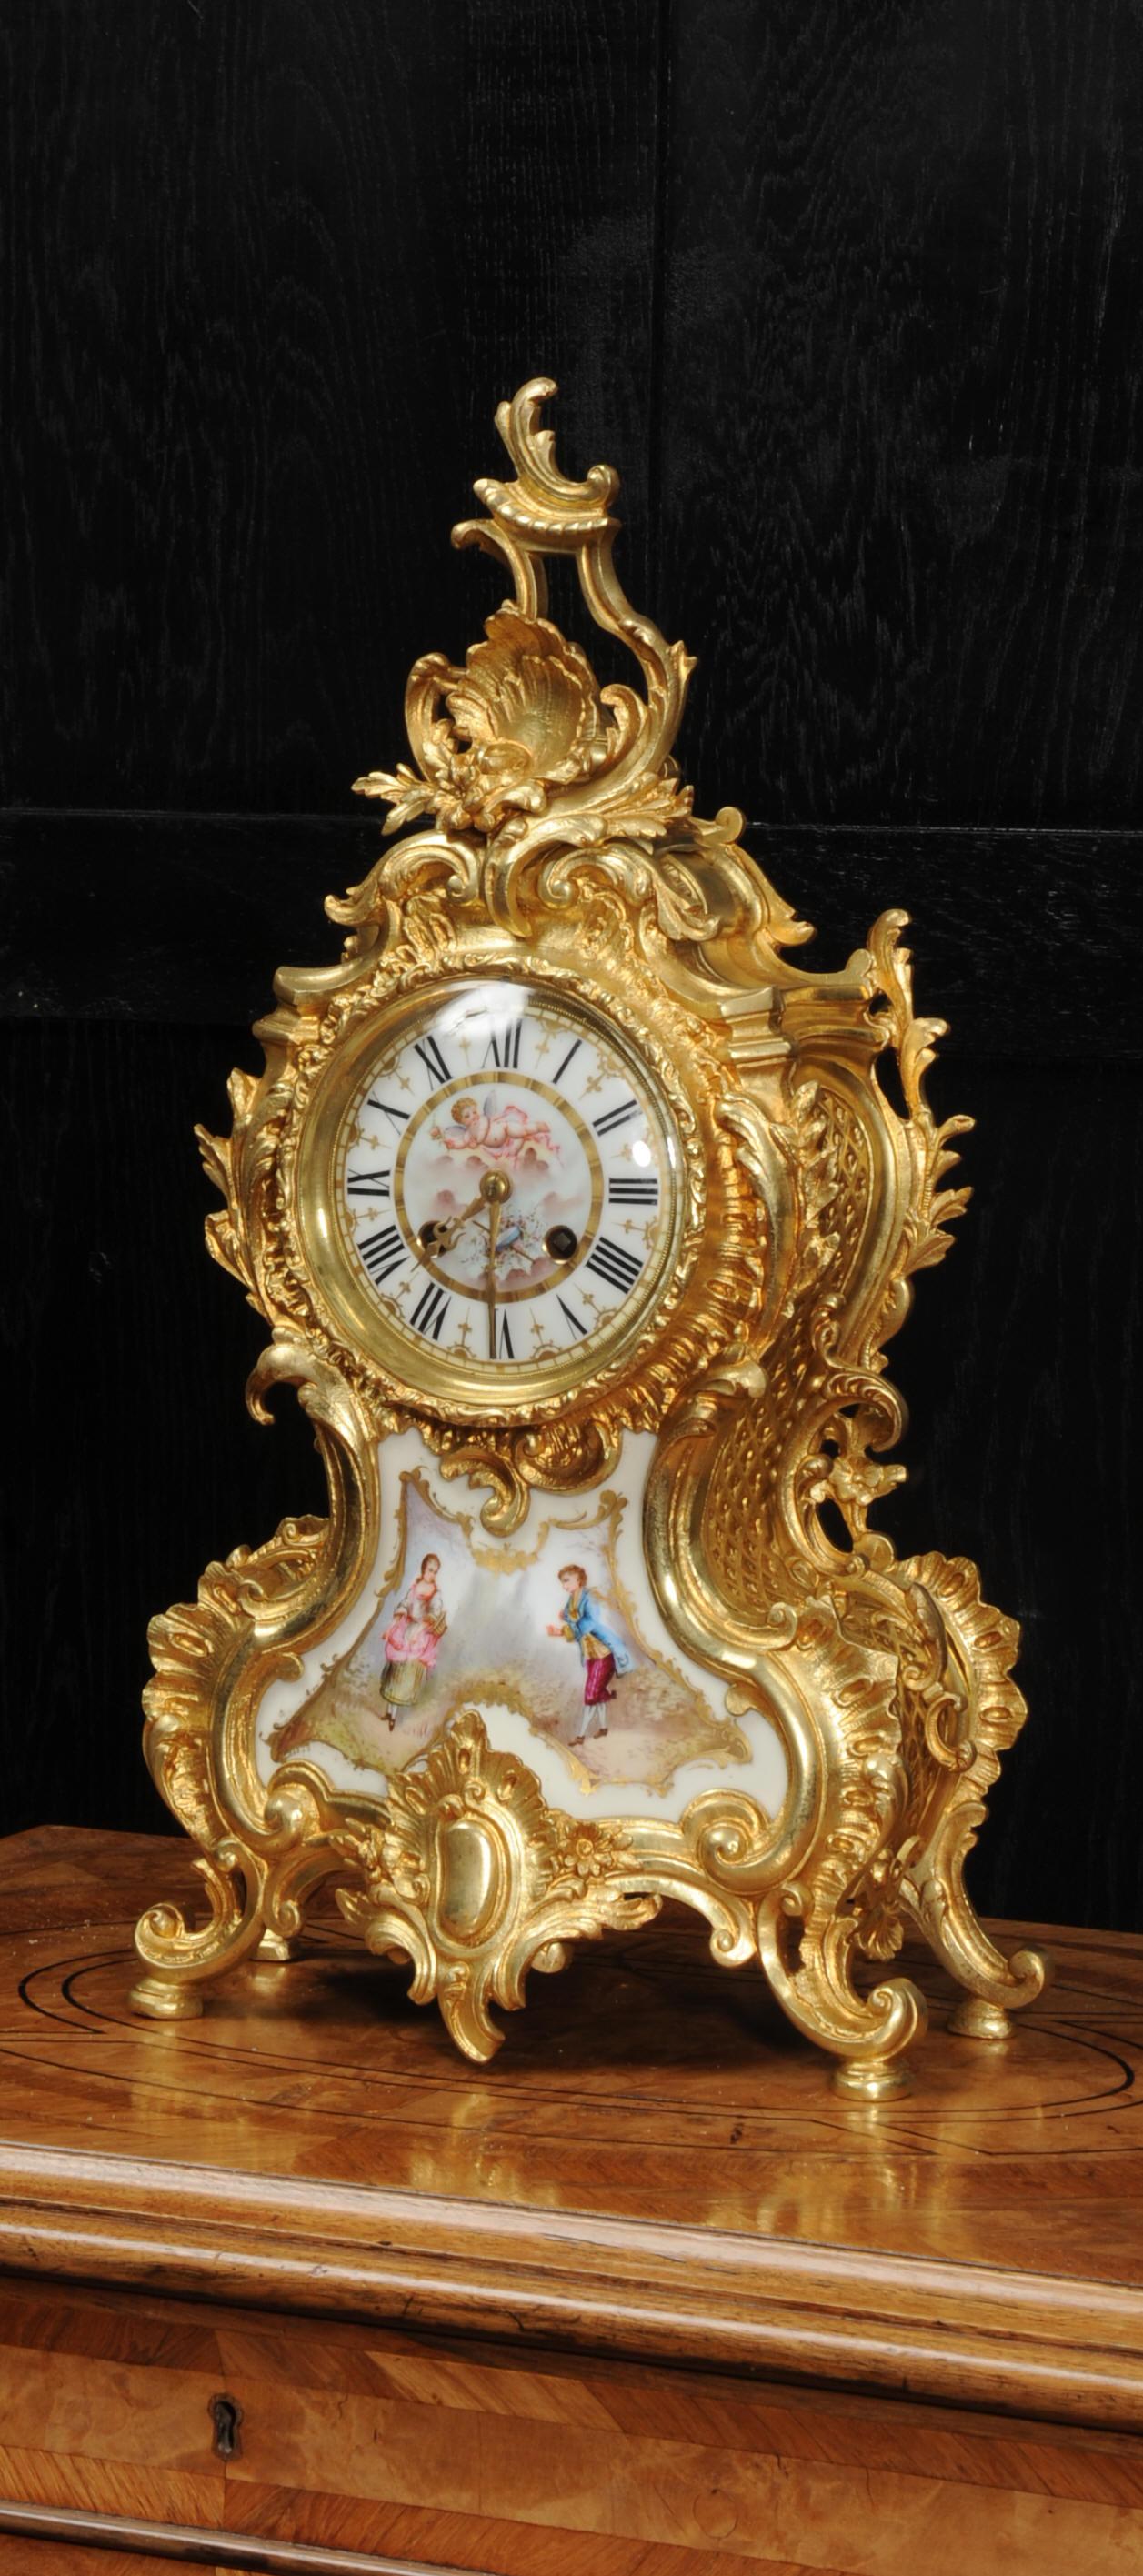 19th Century Large Ormolu and Sevres Porcelain Antique French Rococo Clock